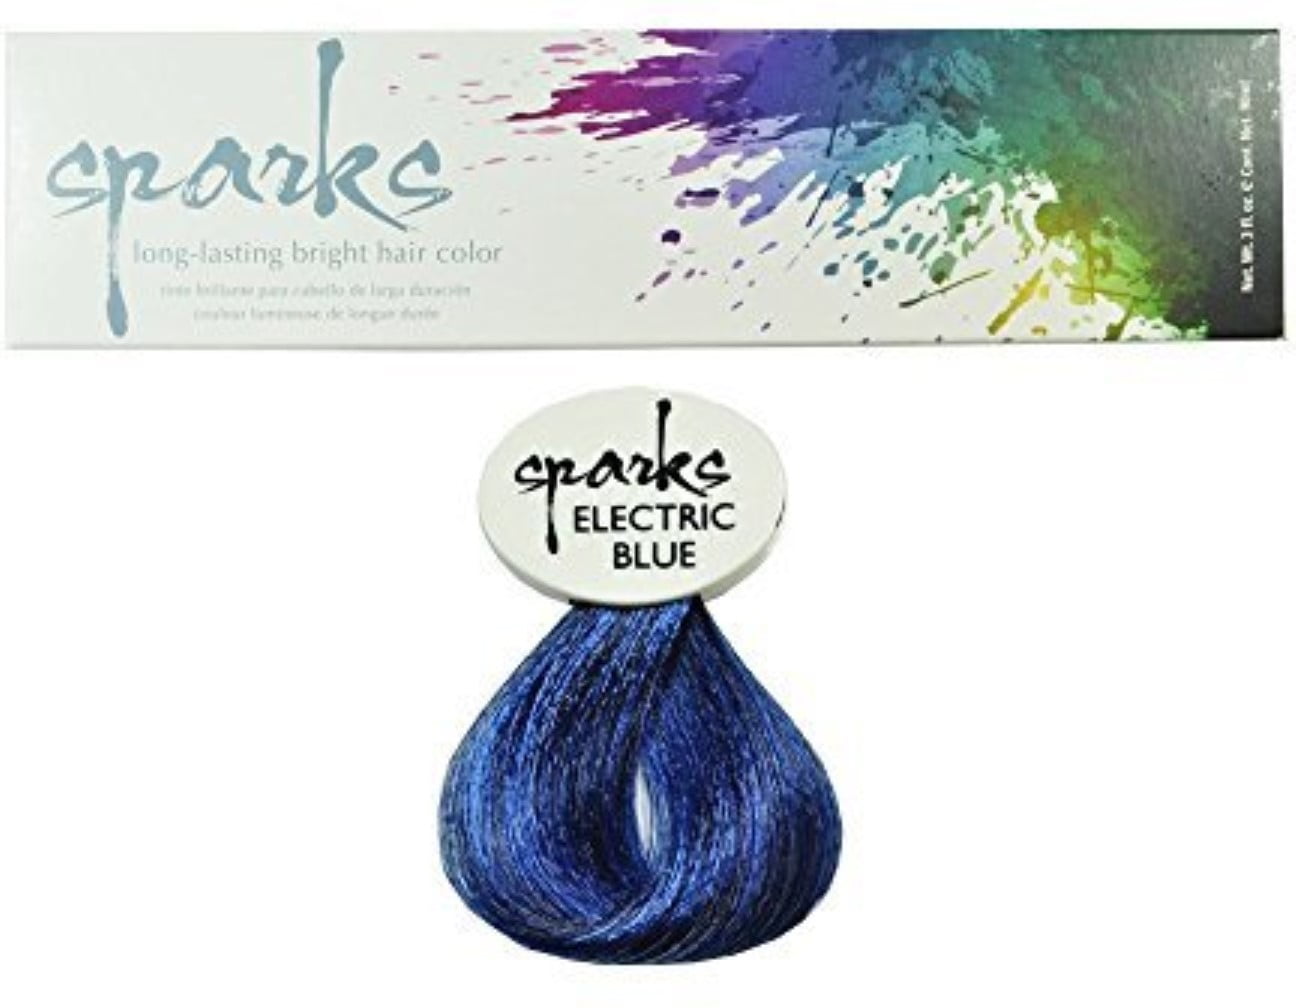 10. Sparks Long Lasting Bright Hair Color - Electric Blue - wide 1